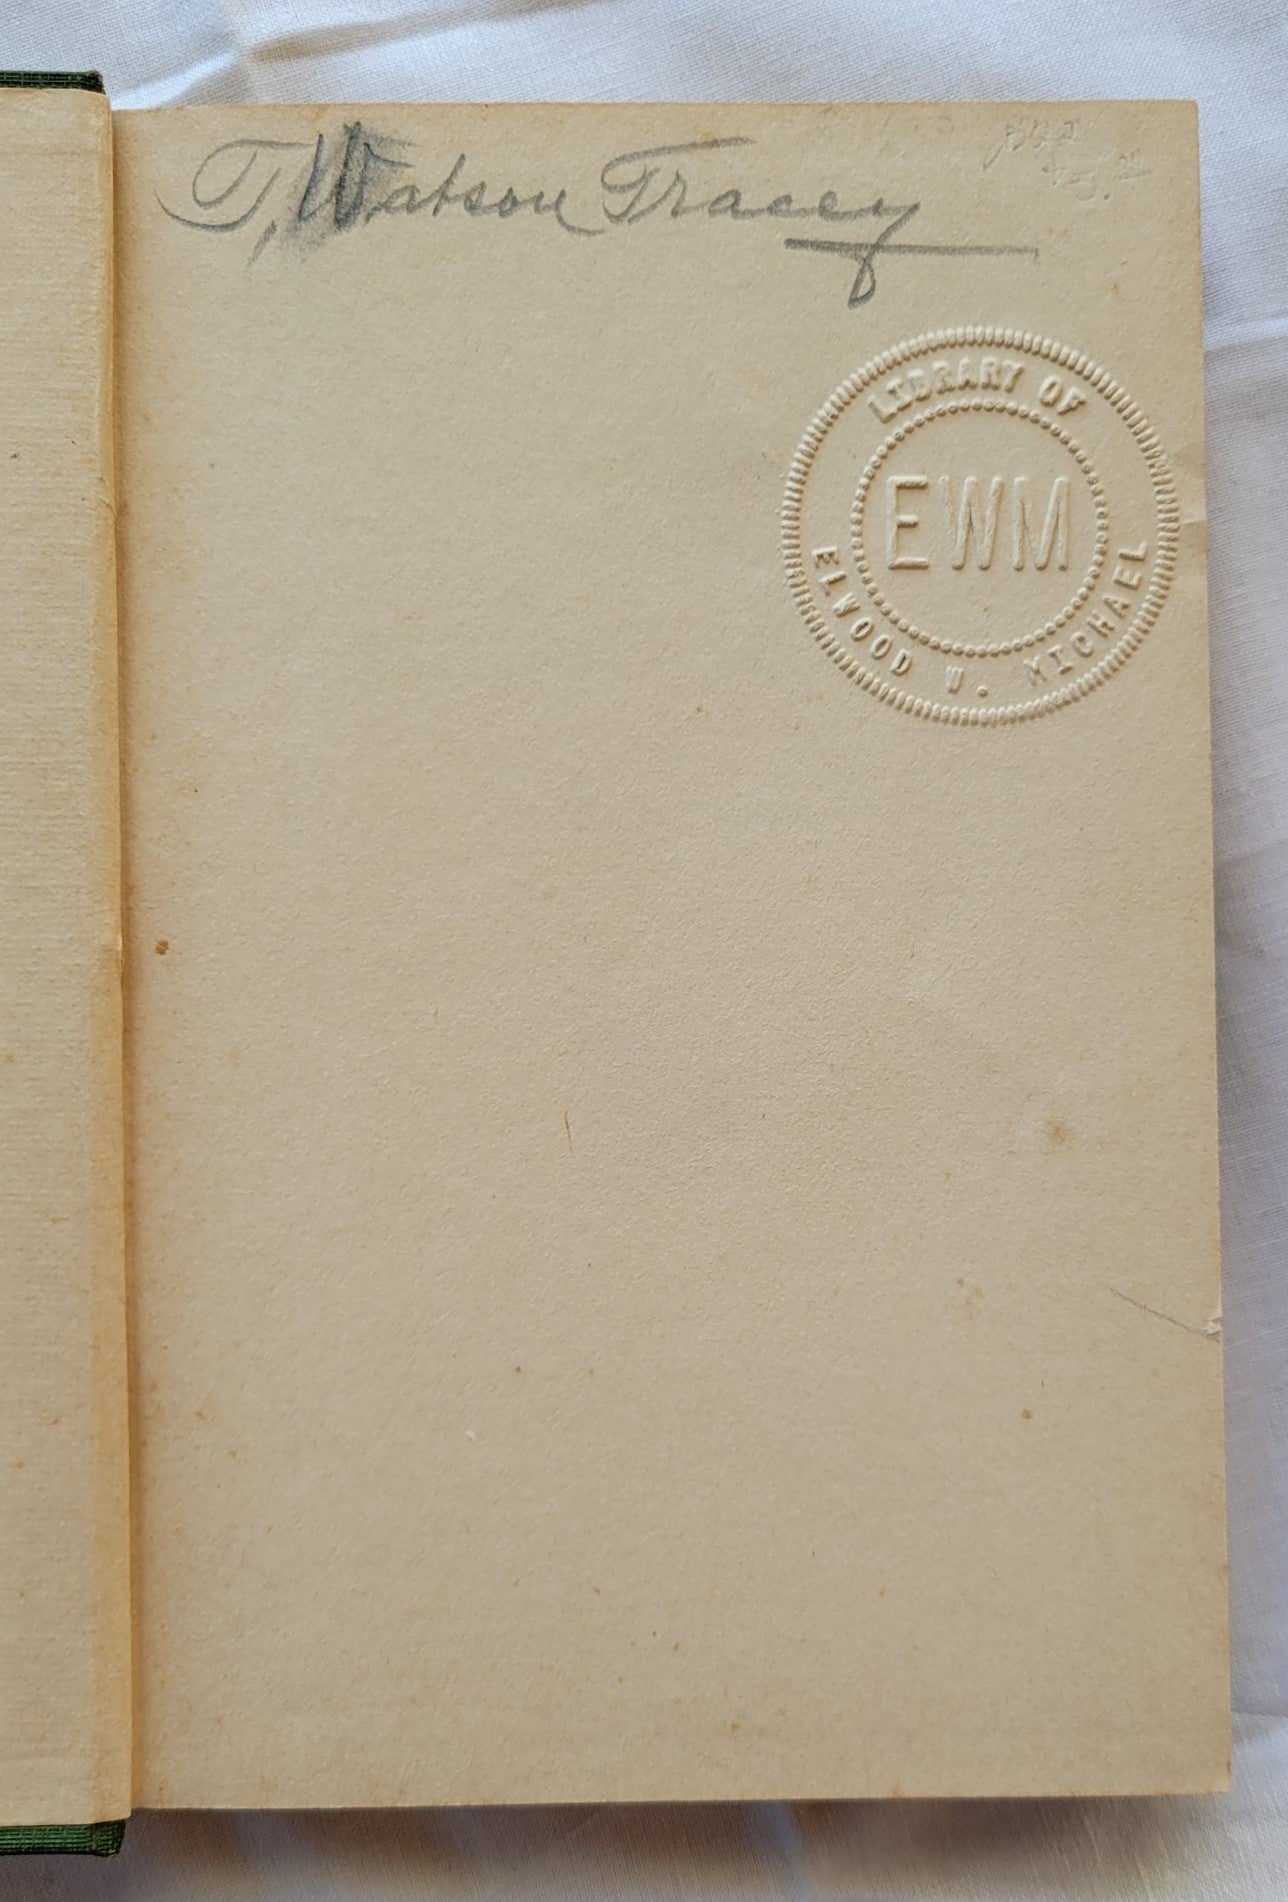  Antique book for sale "The Christ on Indian Road" by E. Stanley Jones, published by Abingdon Press, 1926. Handwritten name and library stamp